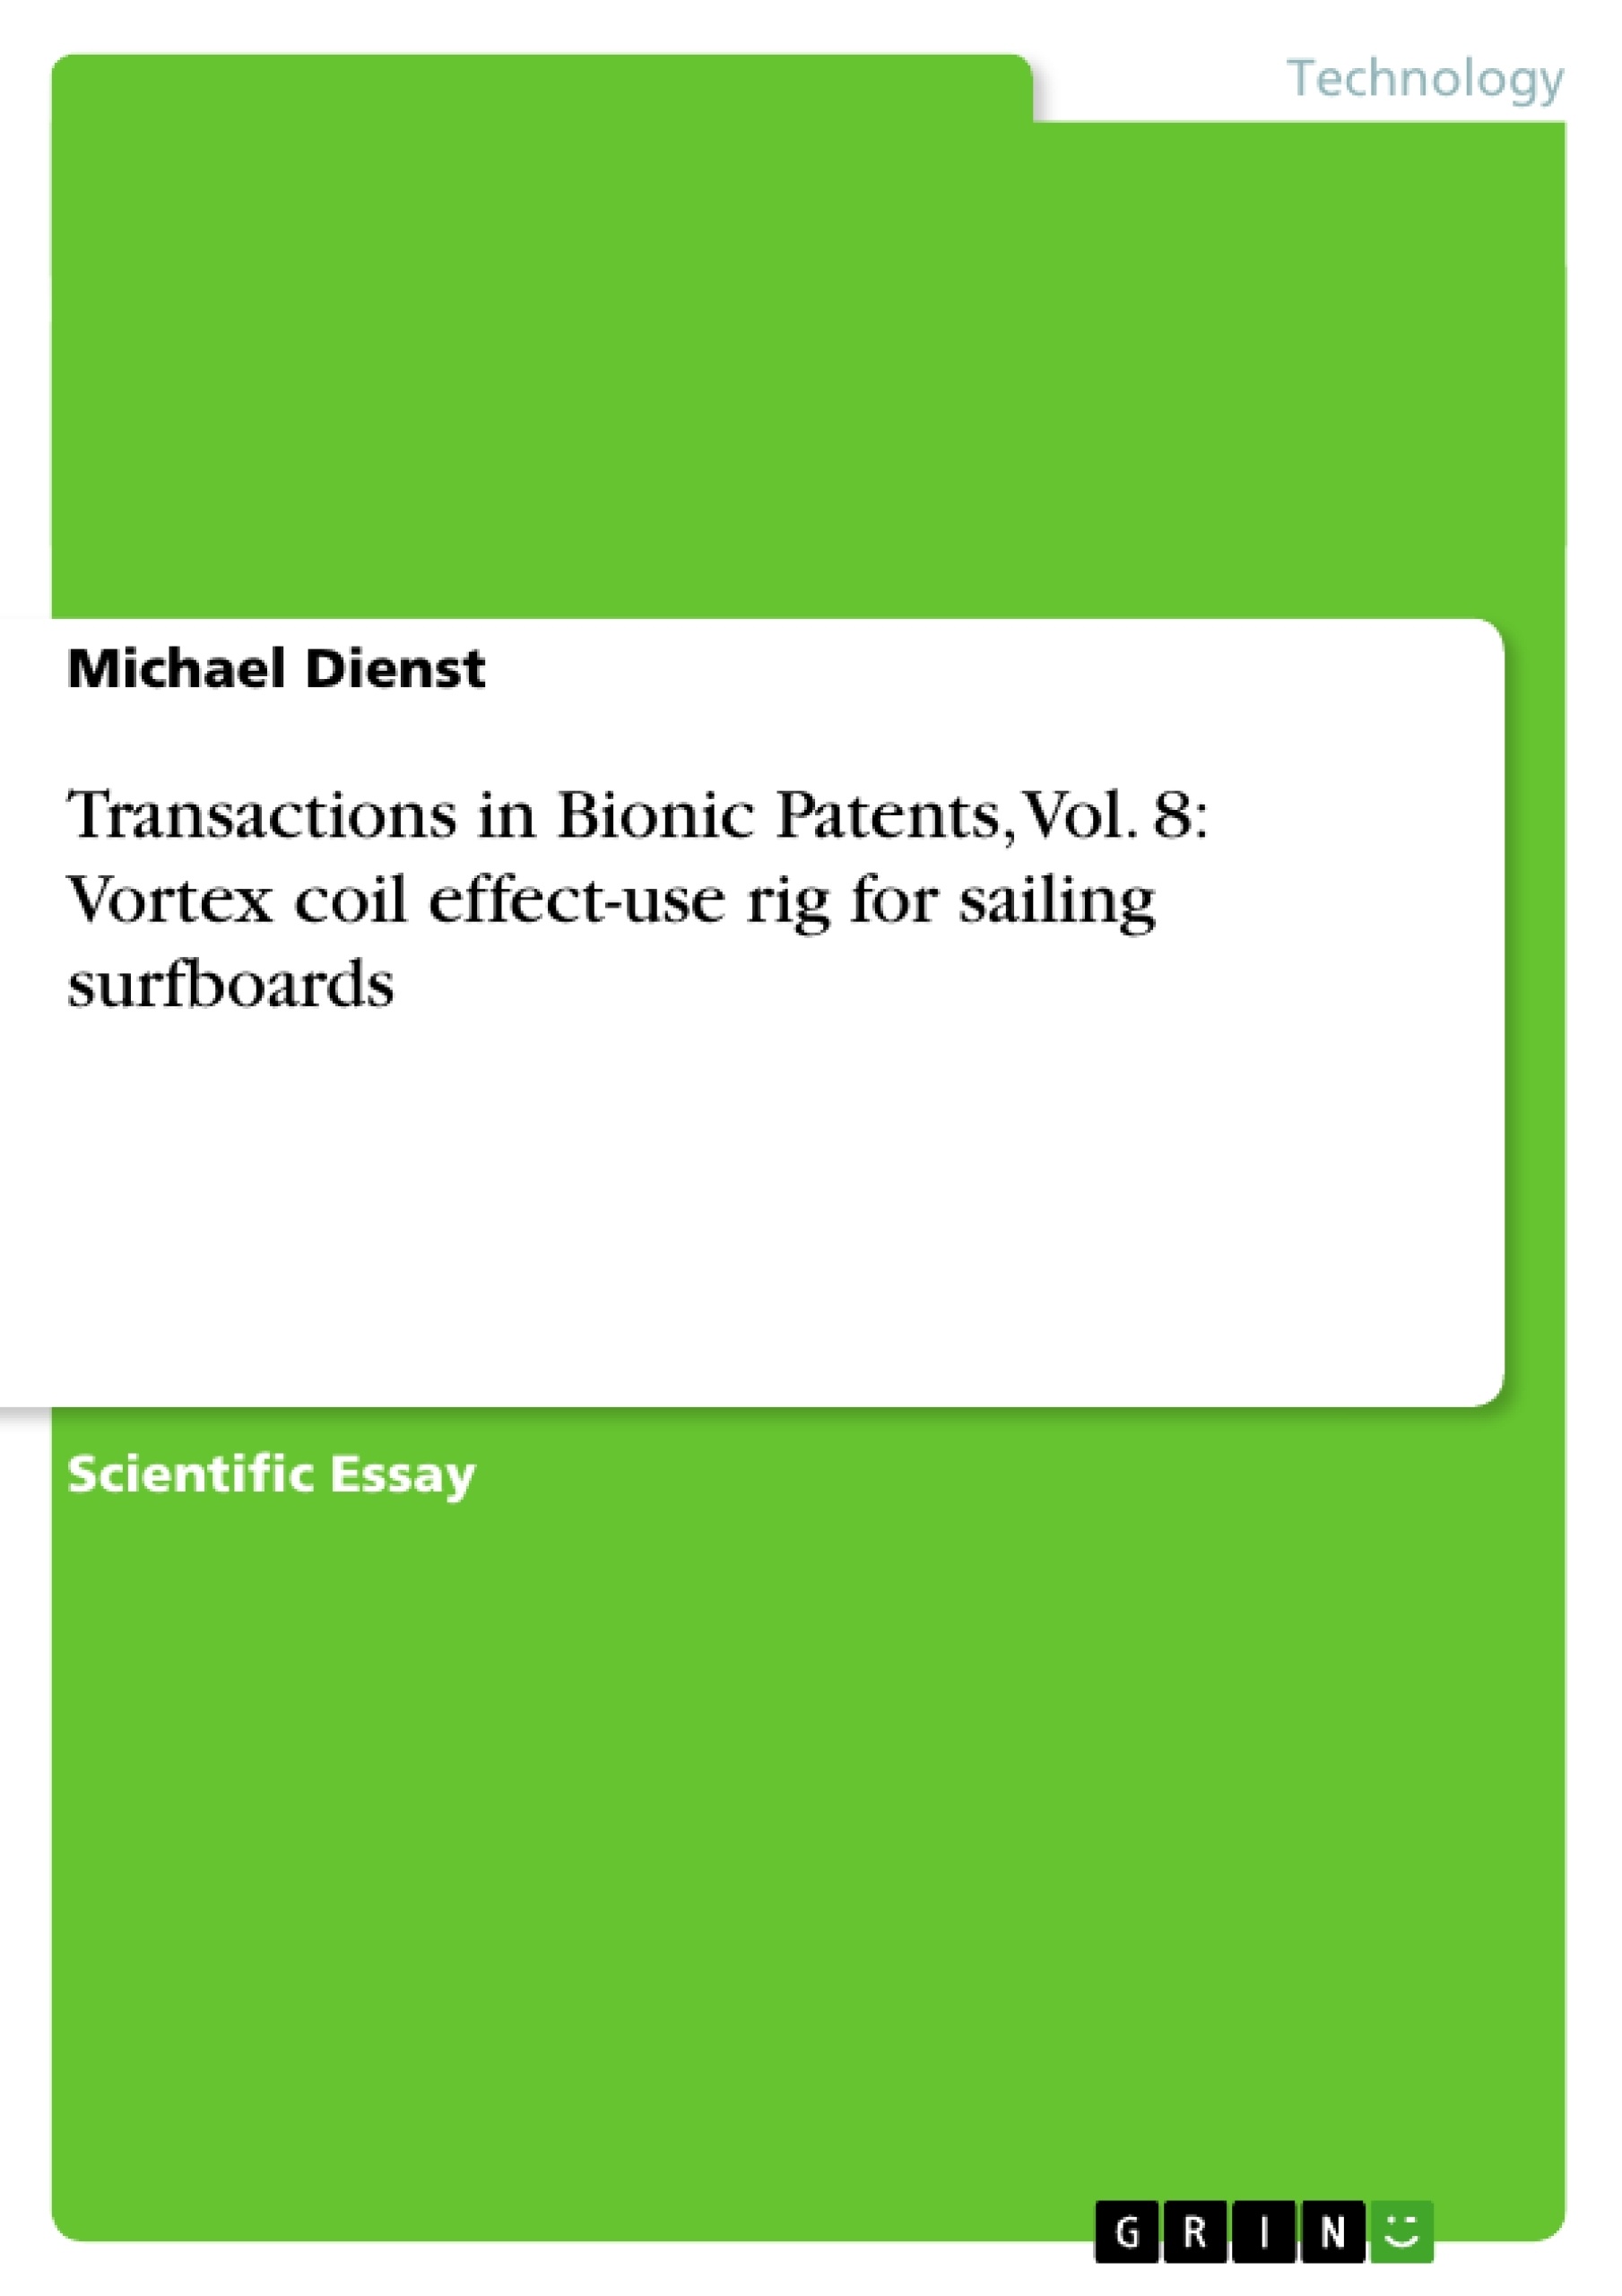 Título: Transactions in Bionic Patents, Vol. 8: Vortex coil effect-use rig for sailing surfboards